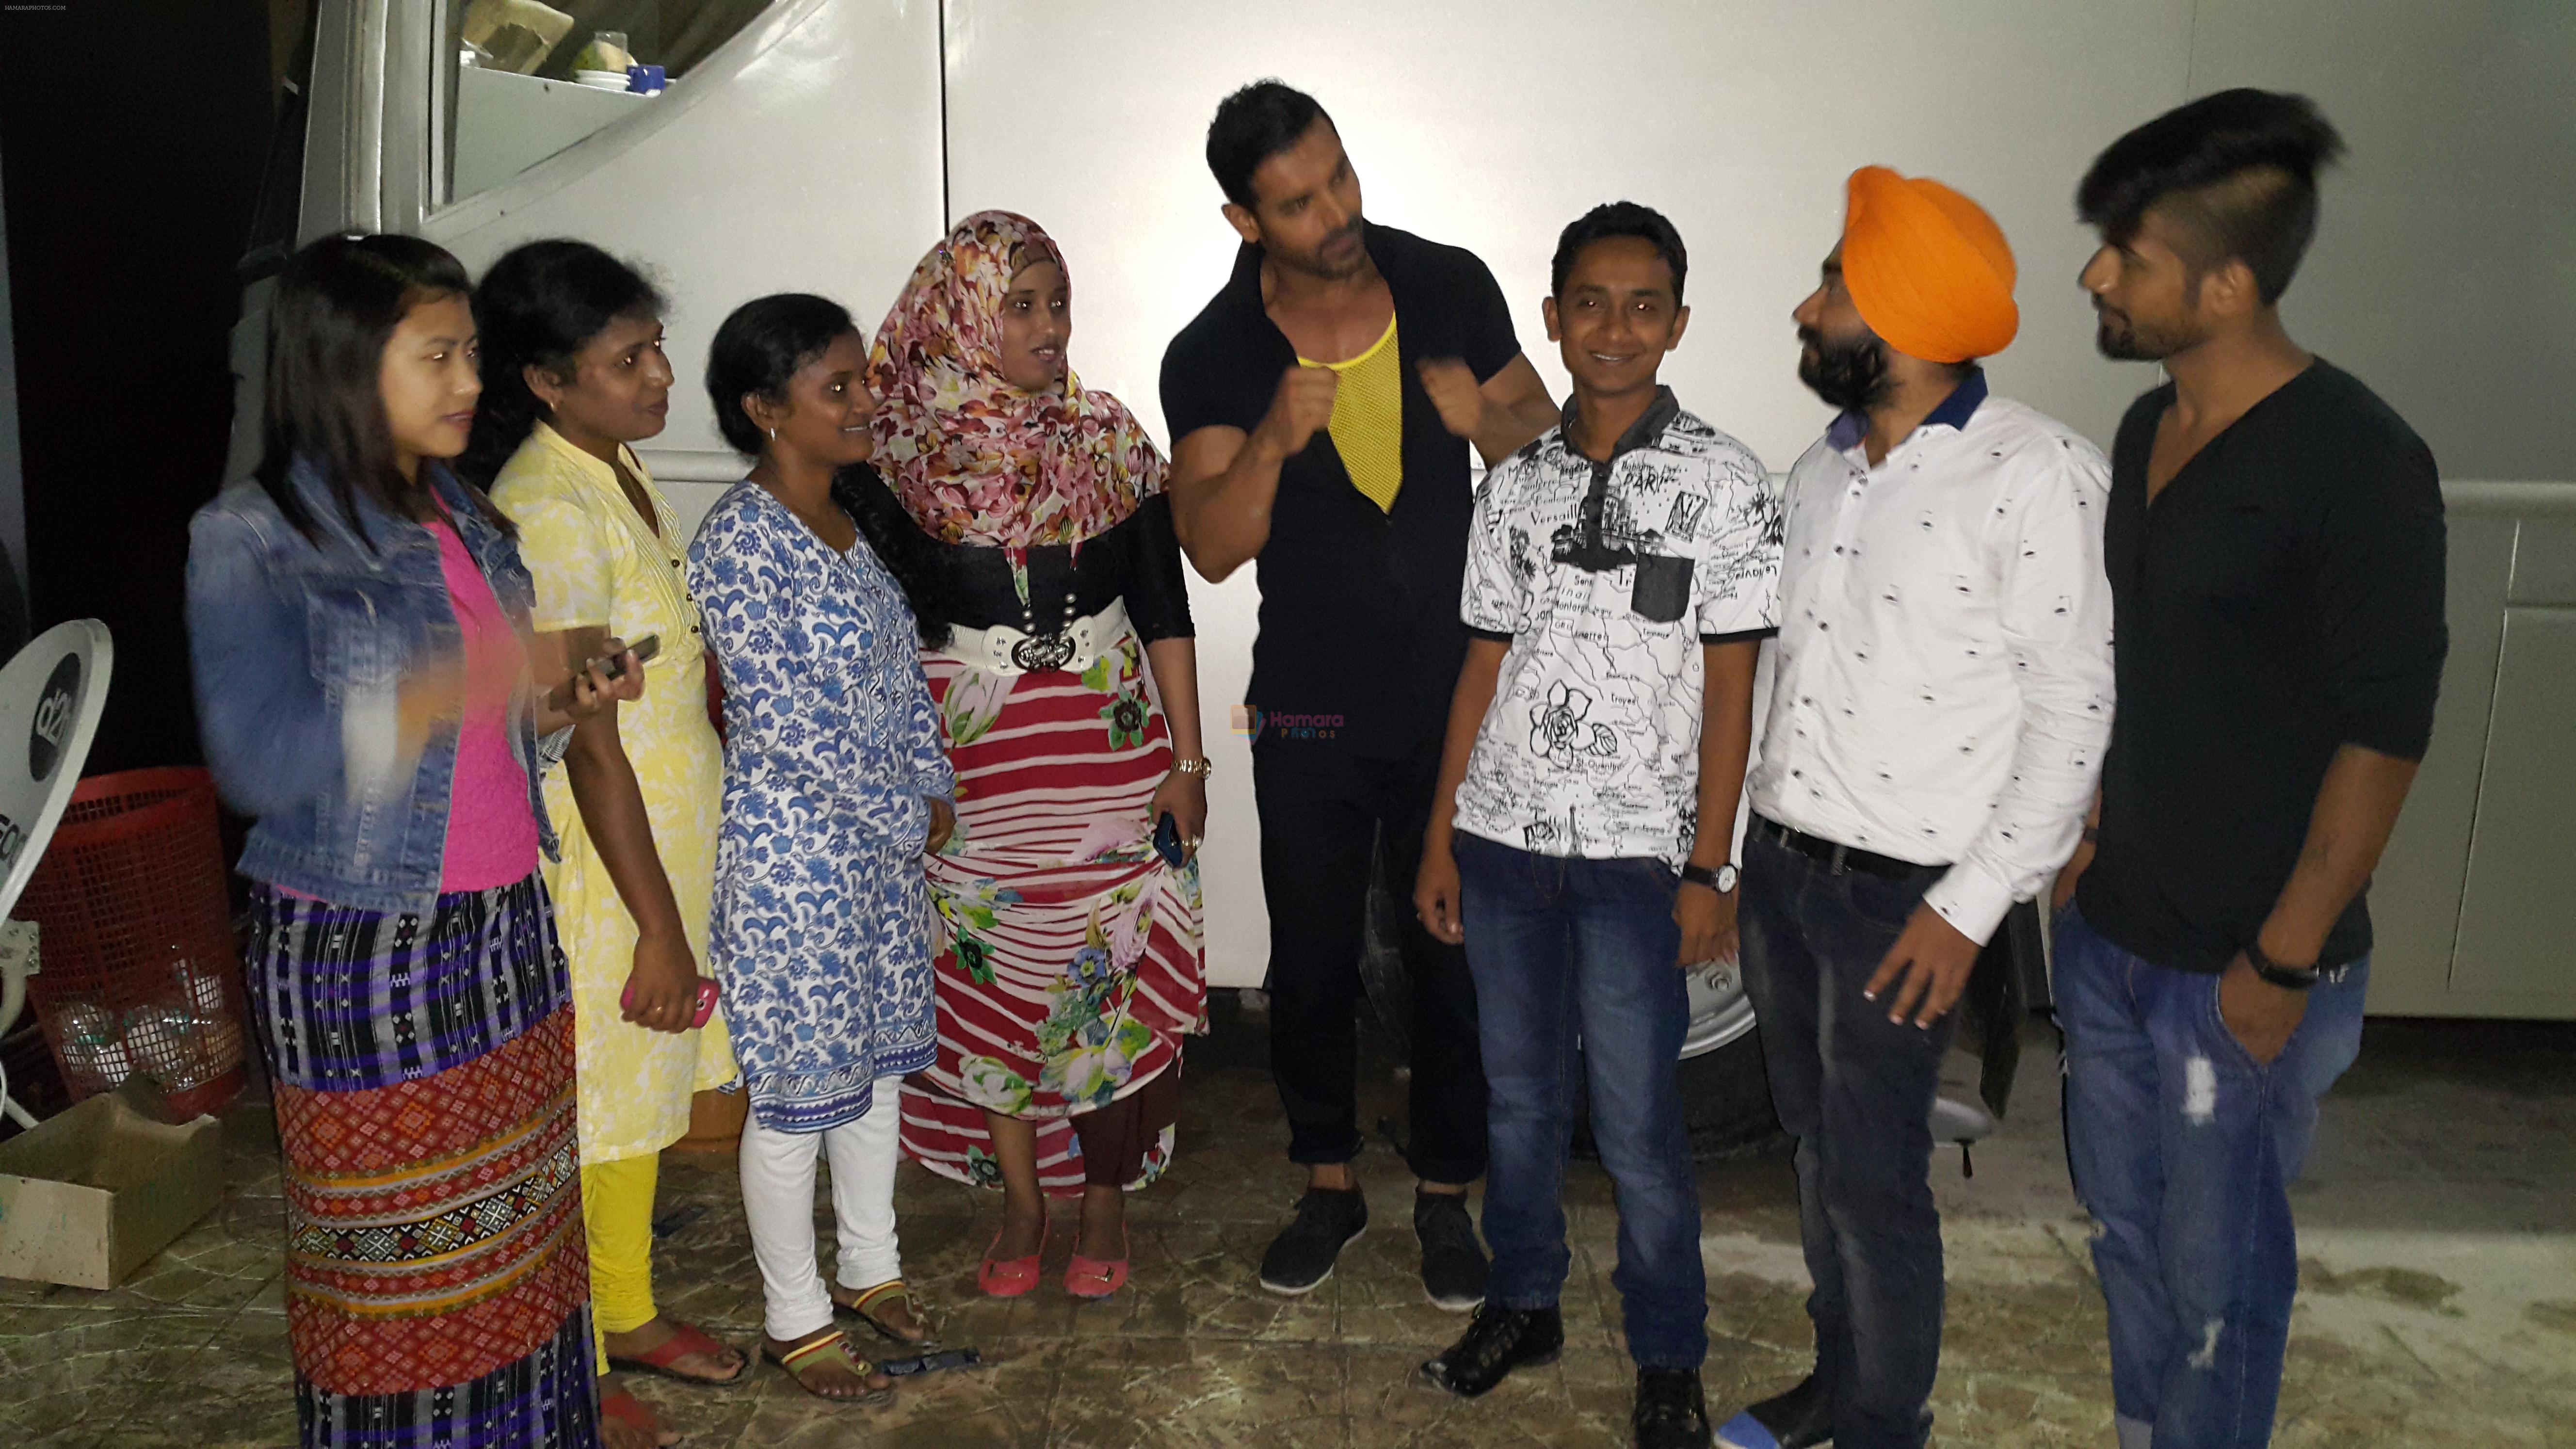 John Abraham spends a day with refugees at his film set supporting United Nations High Commissioner for Refugees (UNHCR )